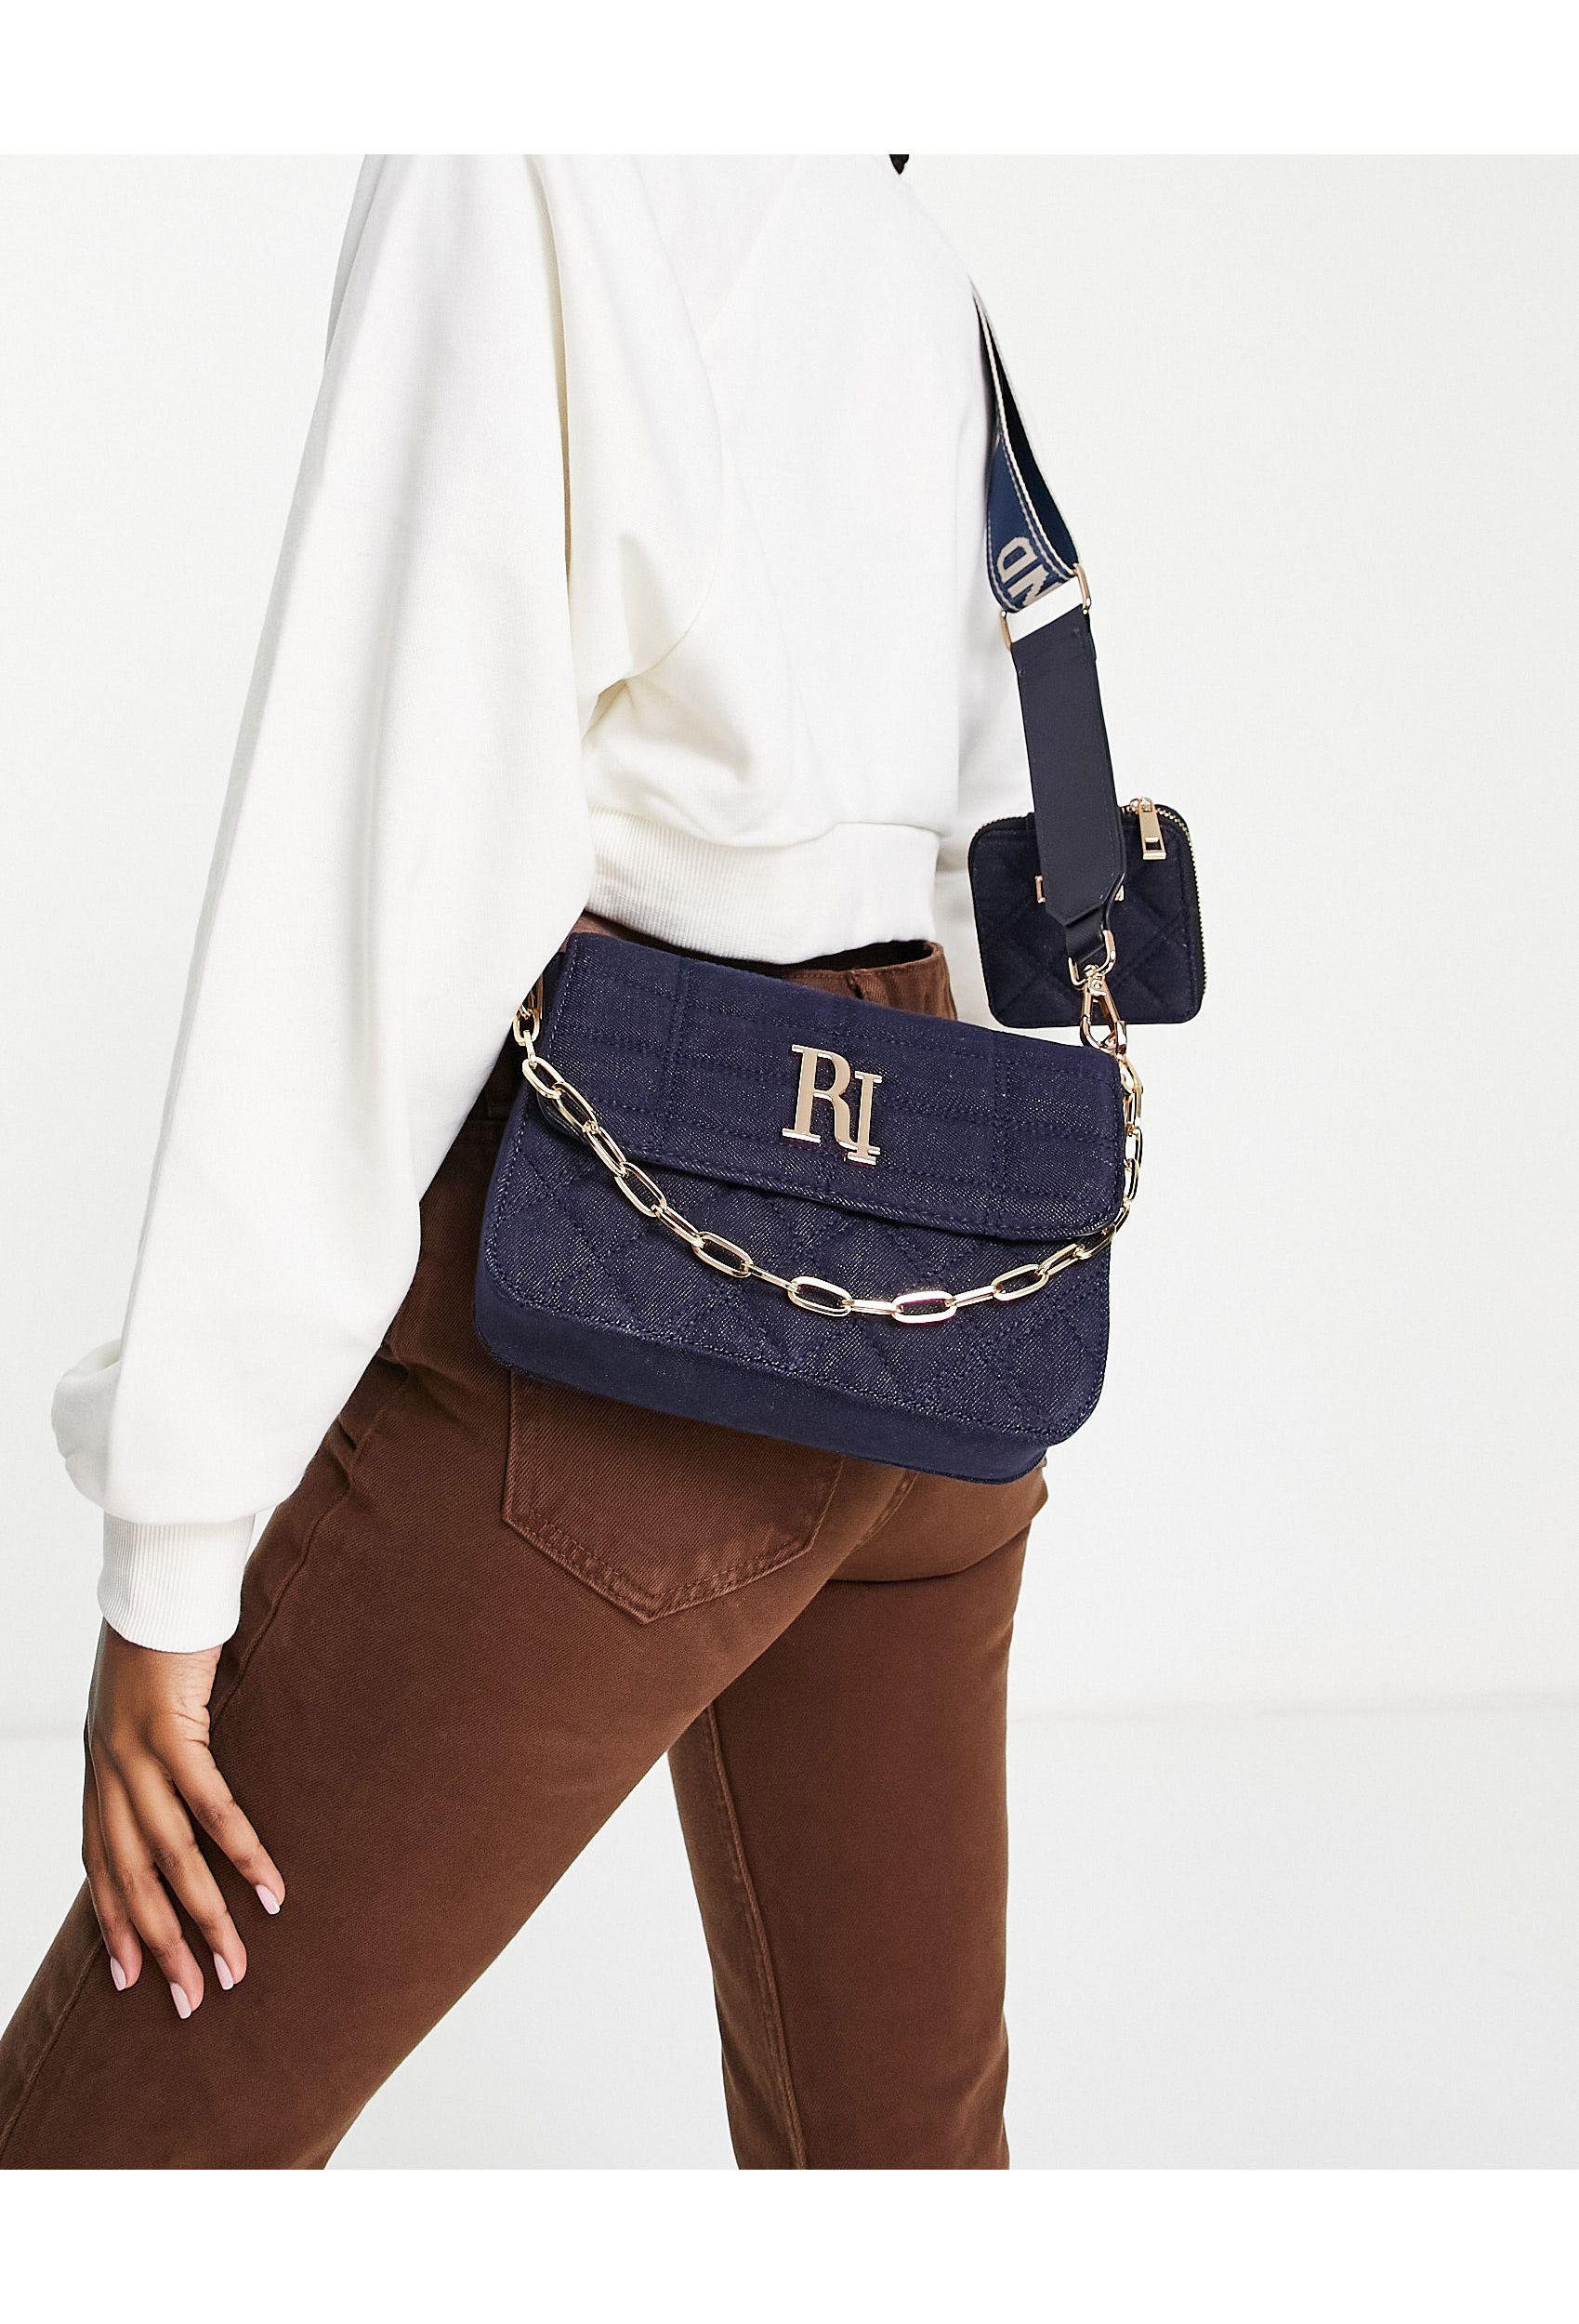 River Island Quilted Denim Double Cross Body Bag in Navy (Blue) | Lyst